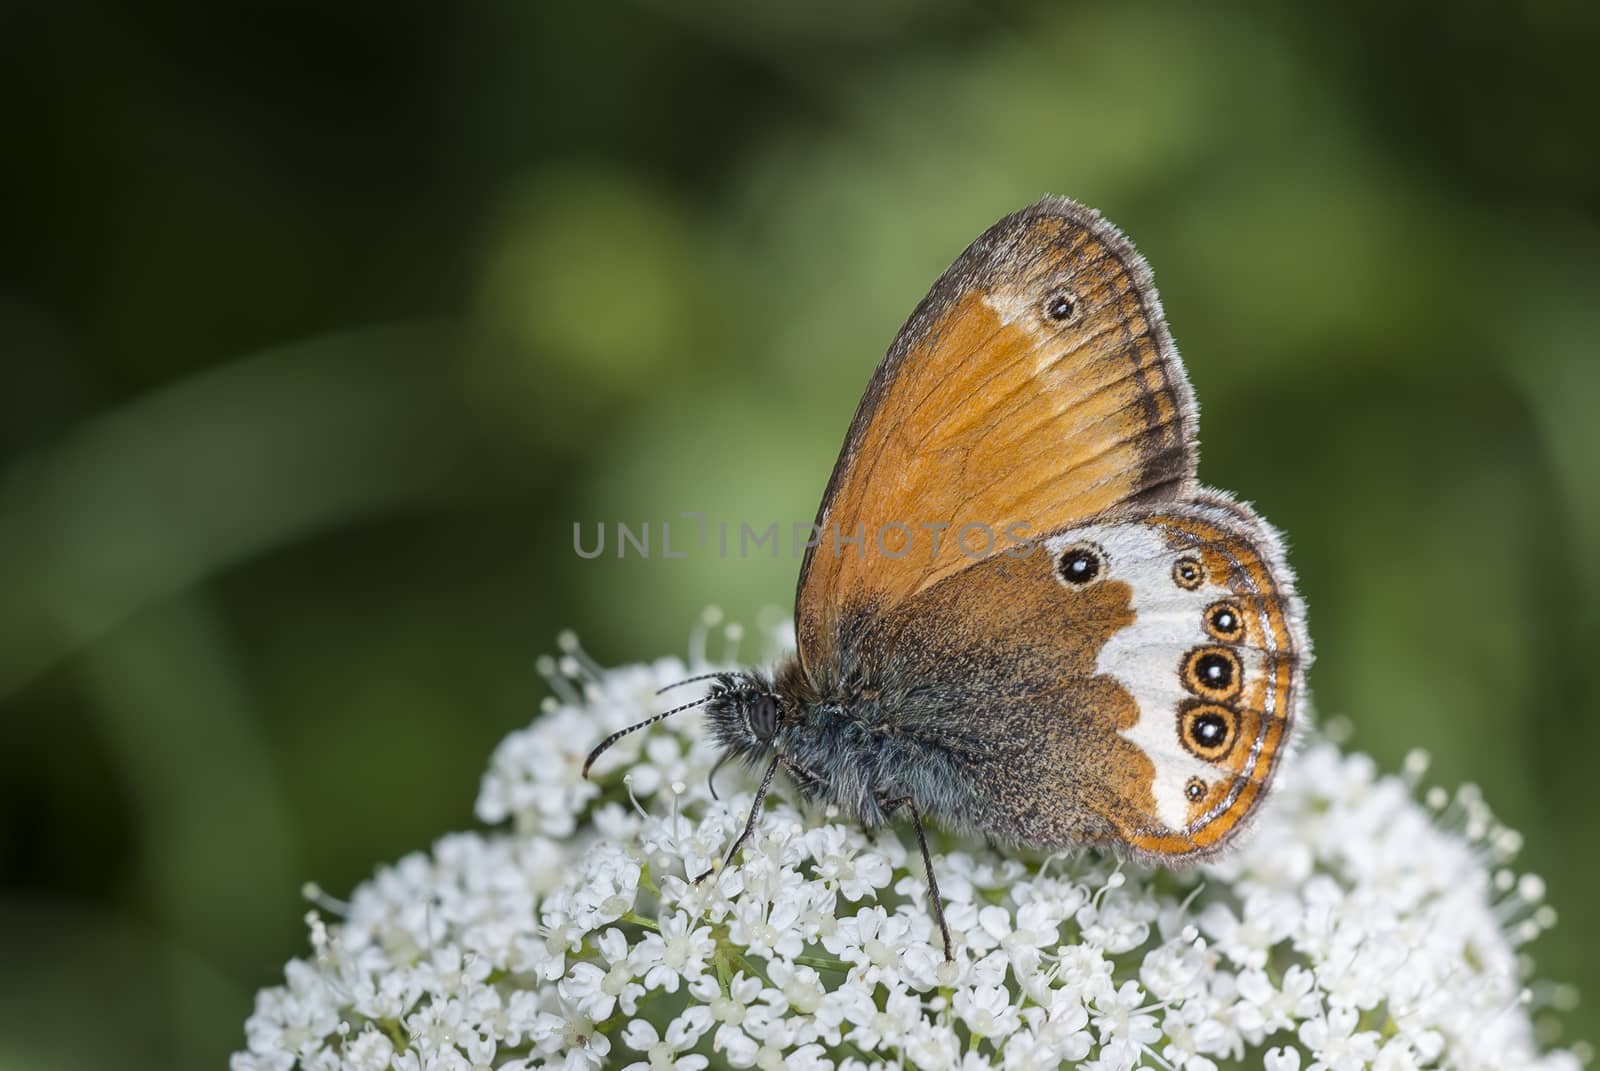 Pearly Heath (Coenonympha arcania) butterfly drinking nectar.